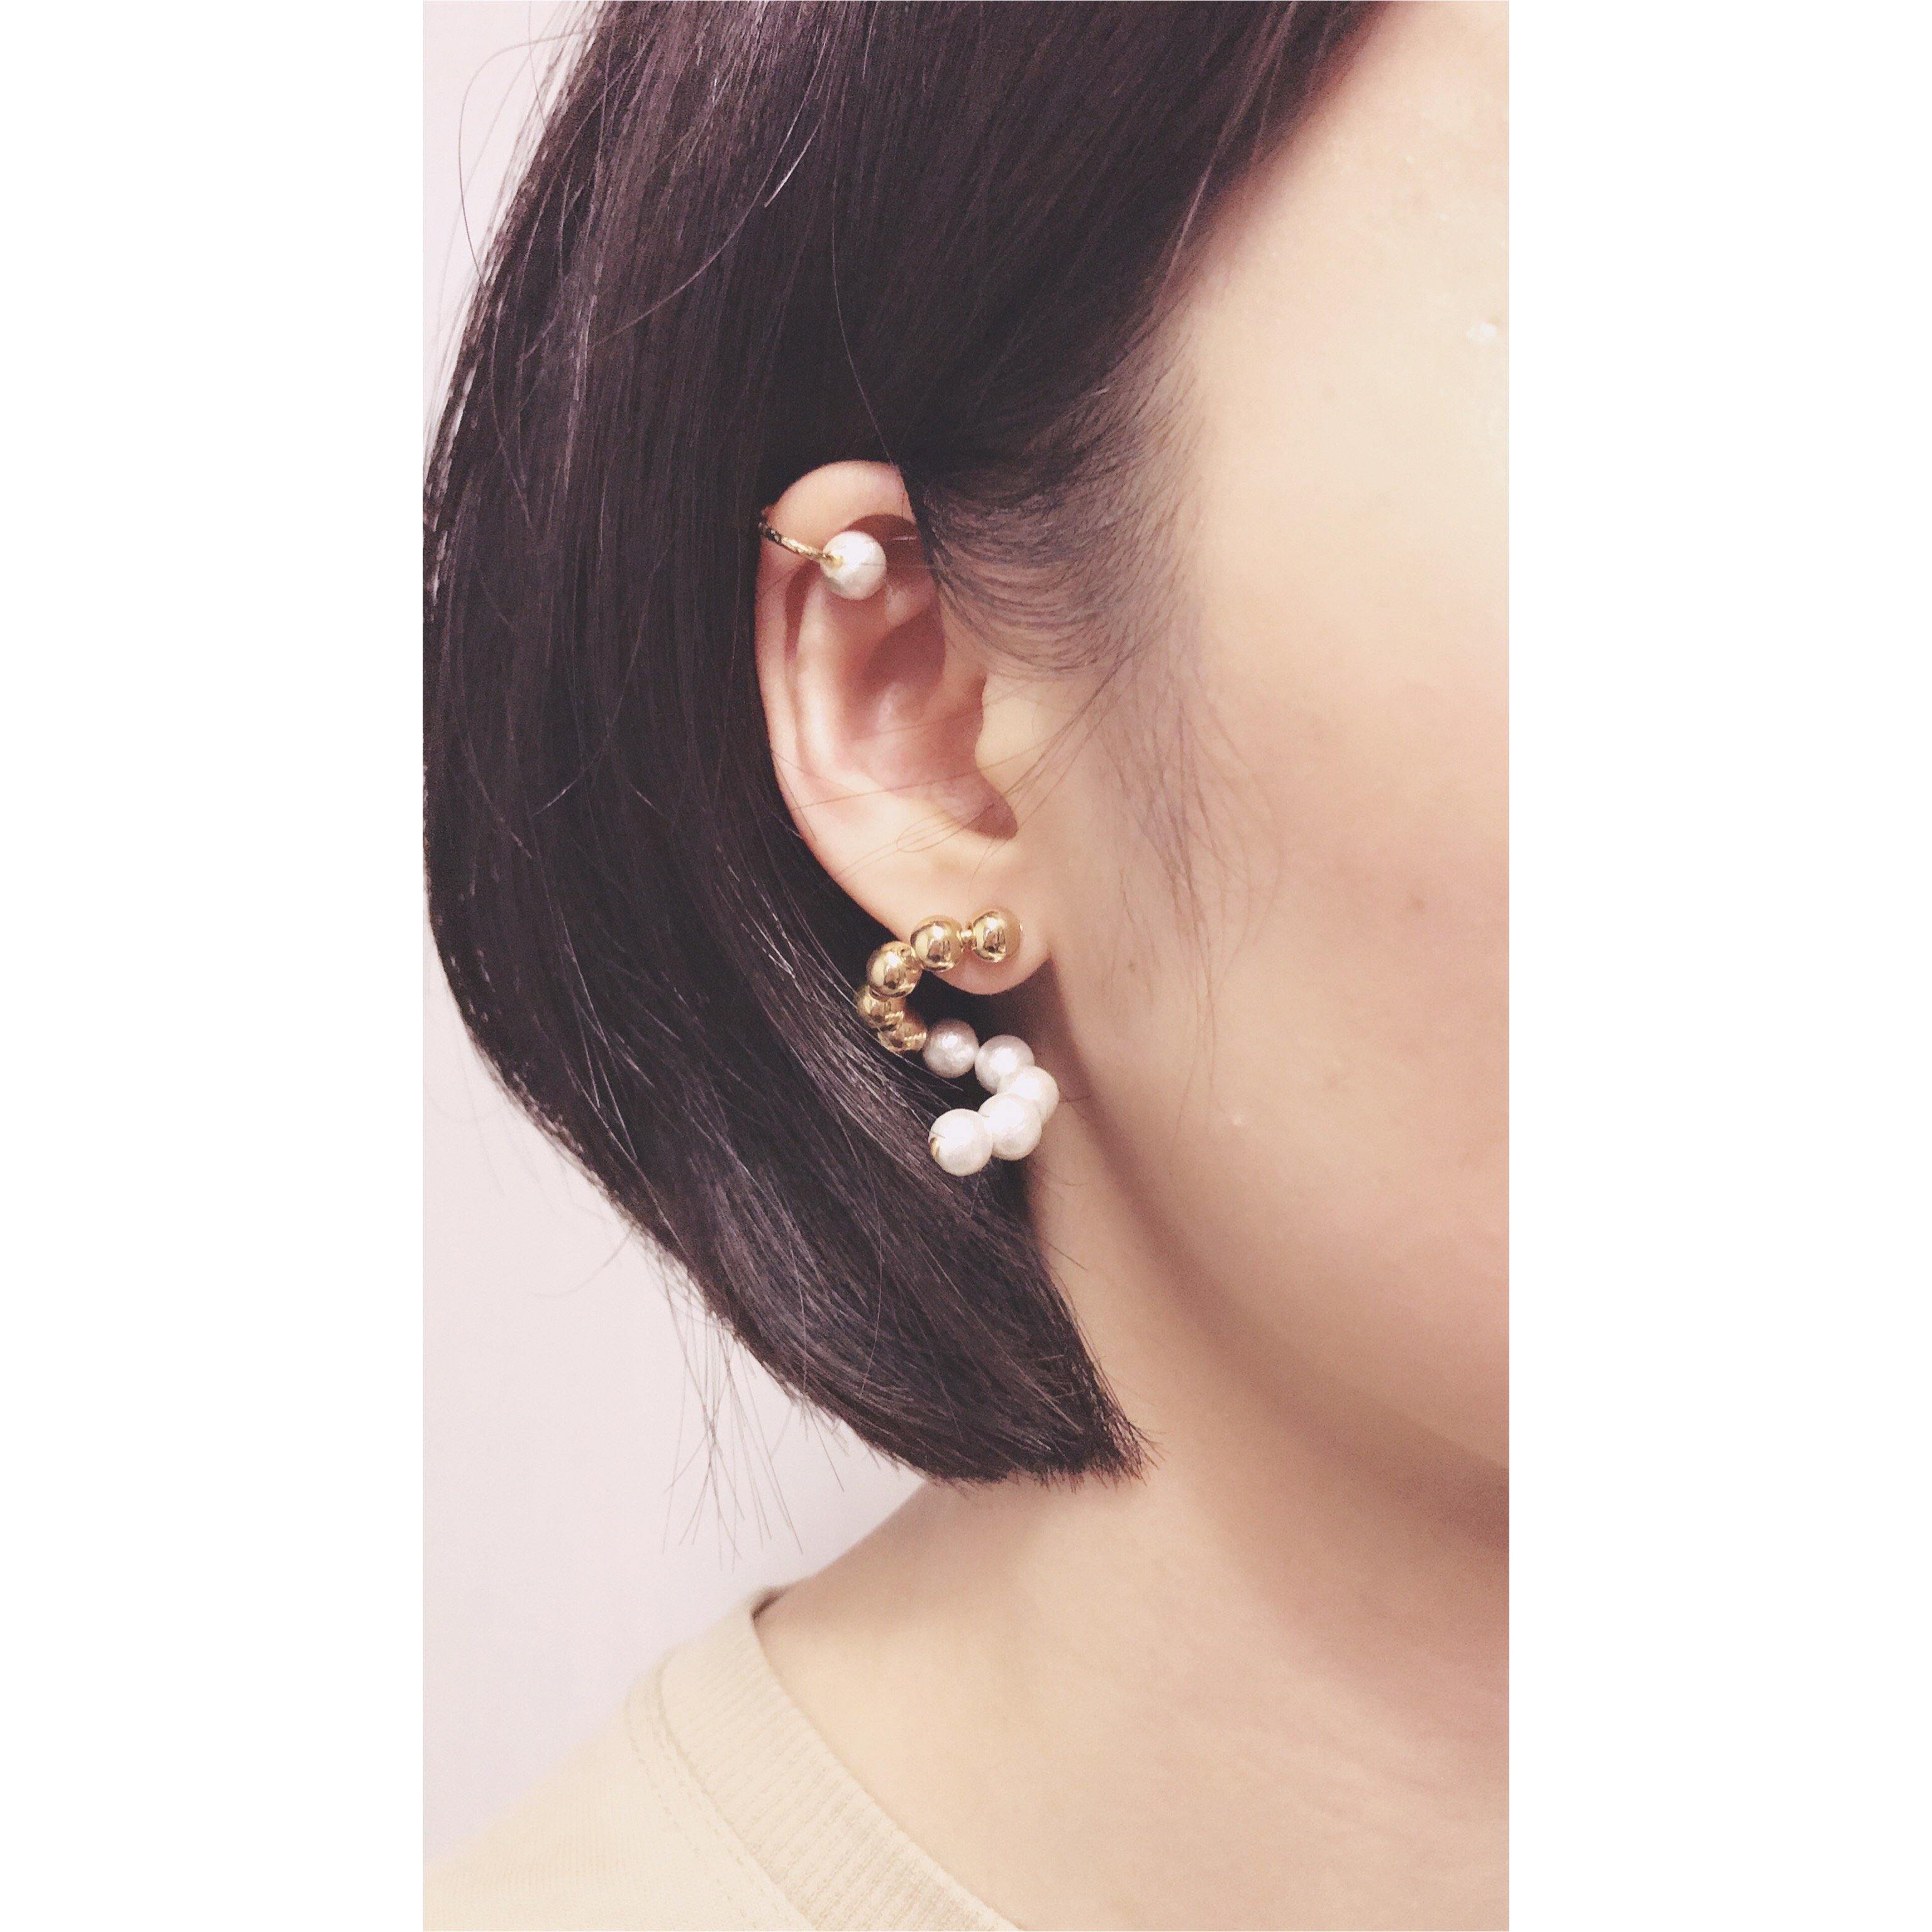 <The Pearl> SOLO S curve earring - MMW Concept